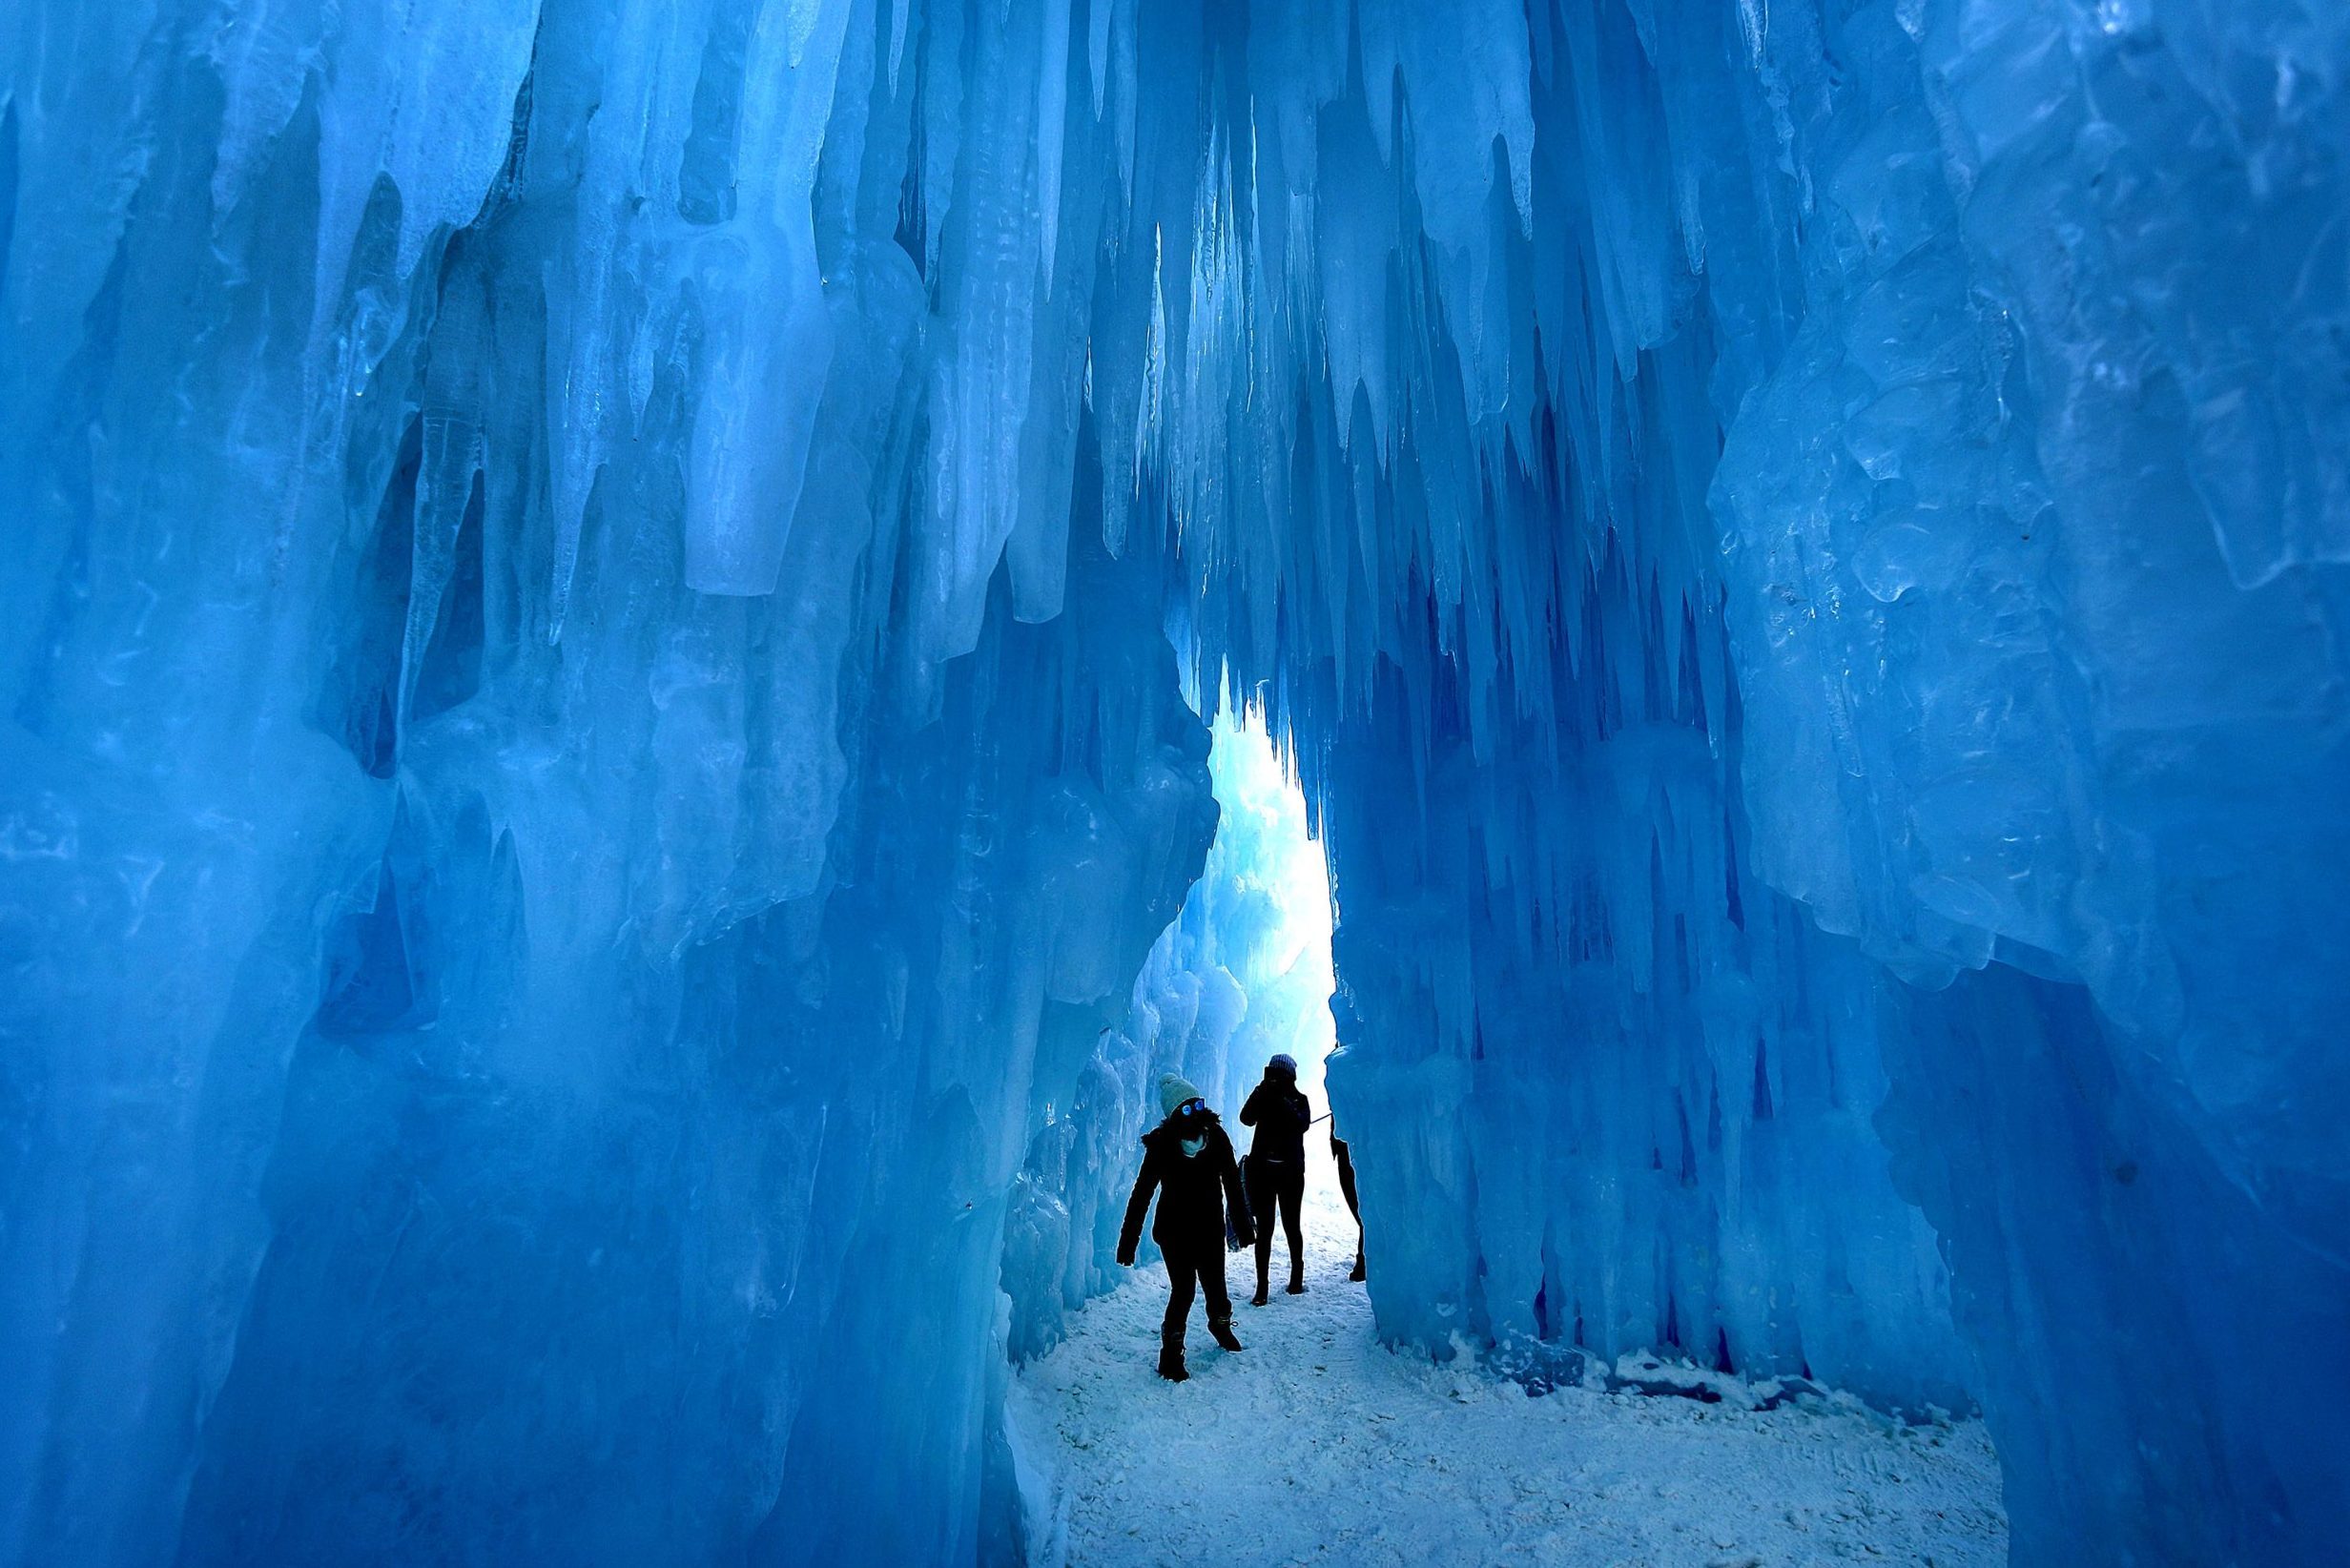 <p><a href="https://www.tripadvisor.com/Attraction_Review-g46140-d9772845-Reviews-Ice_Castles-Lincoln_New_Hampshire.html" rel="noopener">These man-made ice castles</a> are beautifully crafted. The creators use drip pipes to trickle out their icicles, which eventually form together into full-scale icy castles. There are additional locations in Utah, Colorado, Minnesota and Canada. They are only open as long as the weather permits, and opening day also depends on the weather, by location. Tickets are available daily while the castles are open. When summer hits, here's the <a href="https://www.rd.com/list/best-beach-in-every-state/">best beach in every state</a>.</p> <p class="listicle-page__cta-button-shop"><a class="shop-btn" href="https://www.tripadvisor.com/Attraction_Review-g46140-d9772845-Reviews-Ice_Castles-Lincoln_New_Hampshire.html">Learn More</a></p>